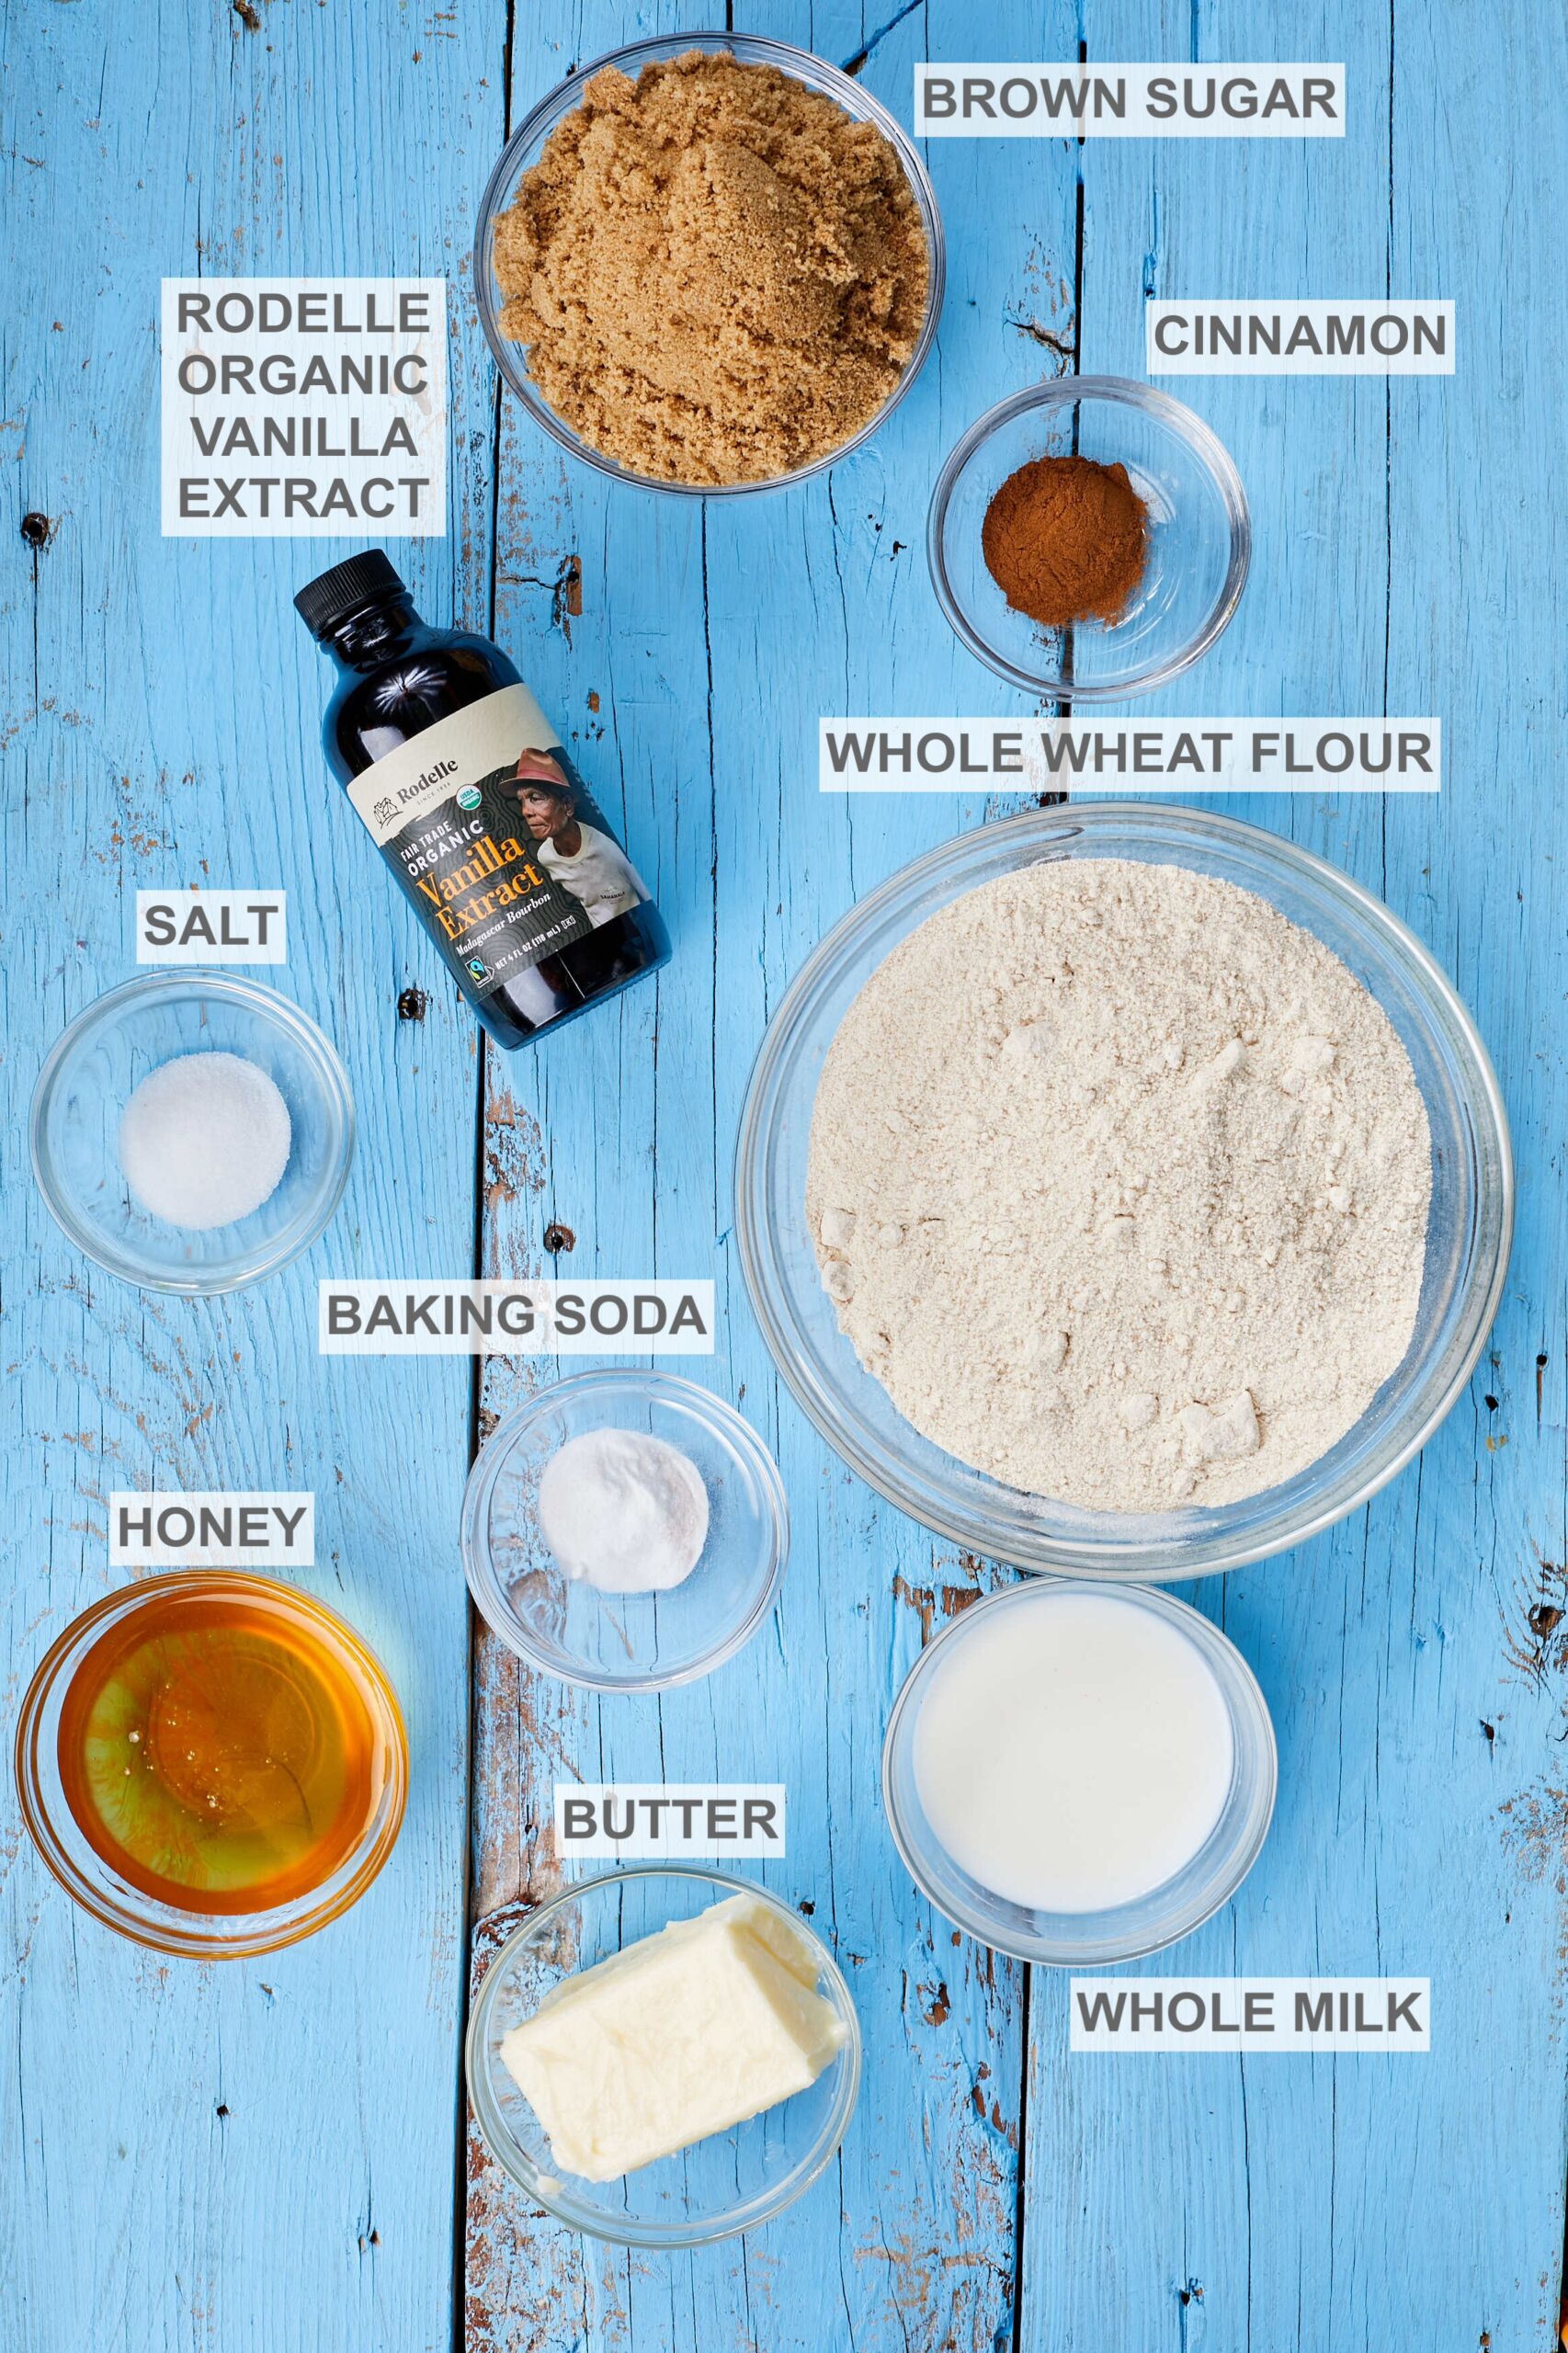 Ingredients of Homemade S'mores Bars Recipe